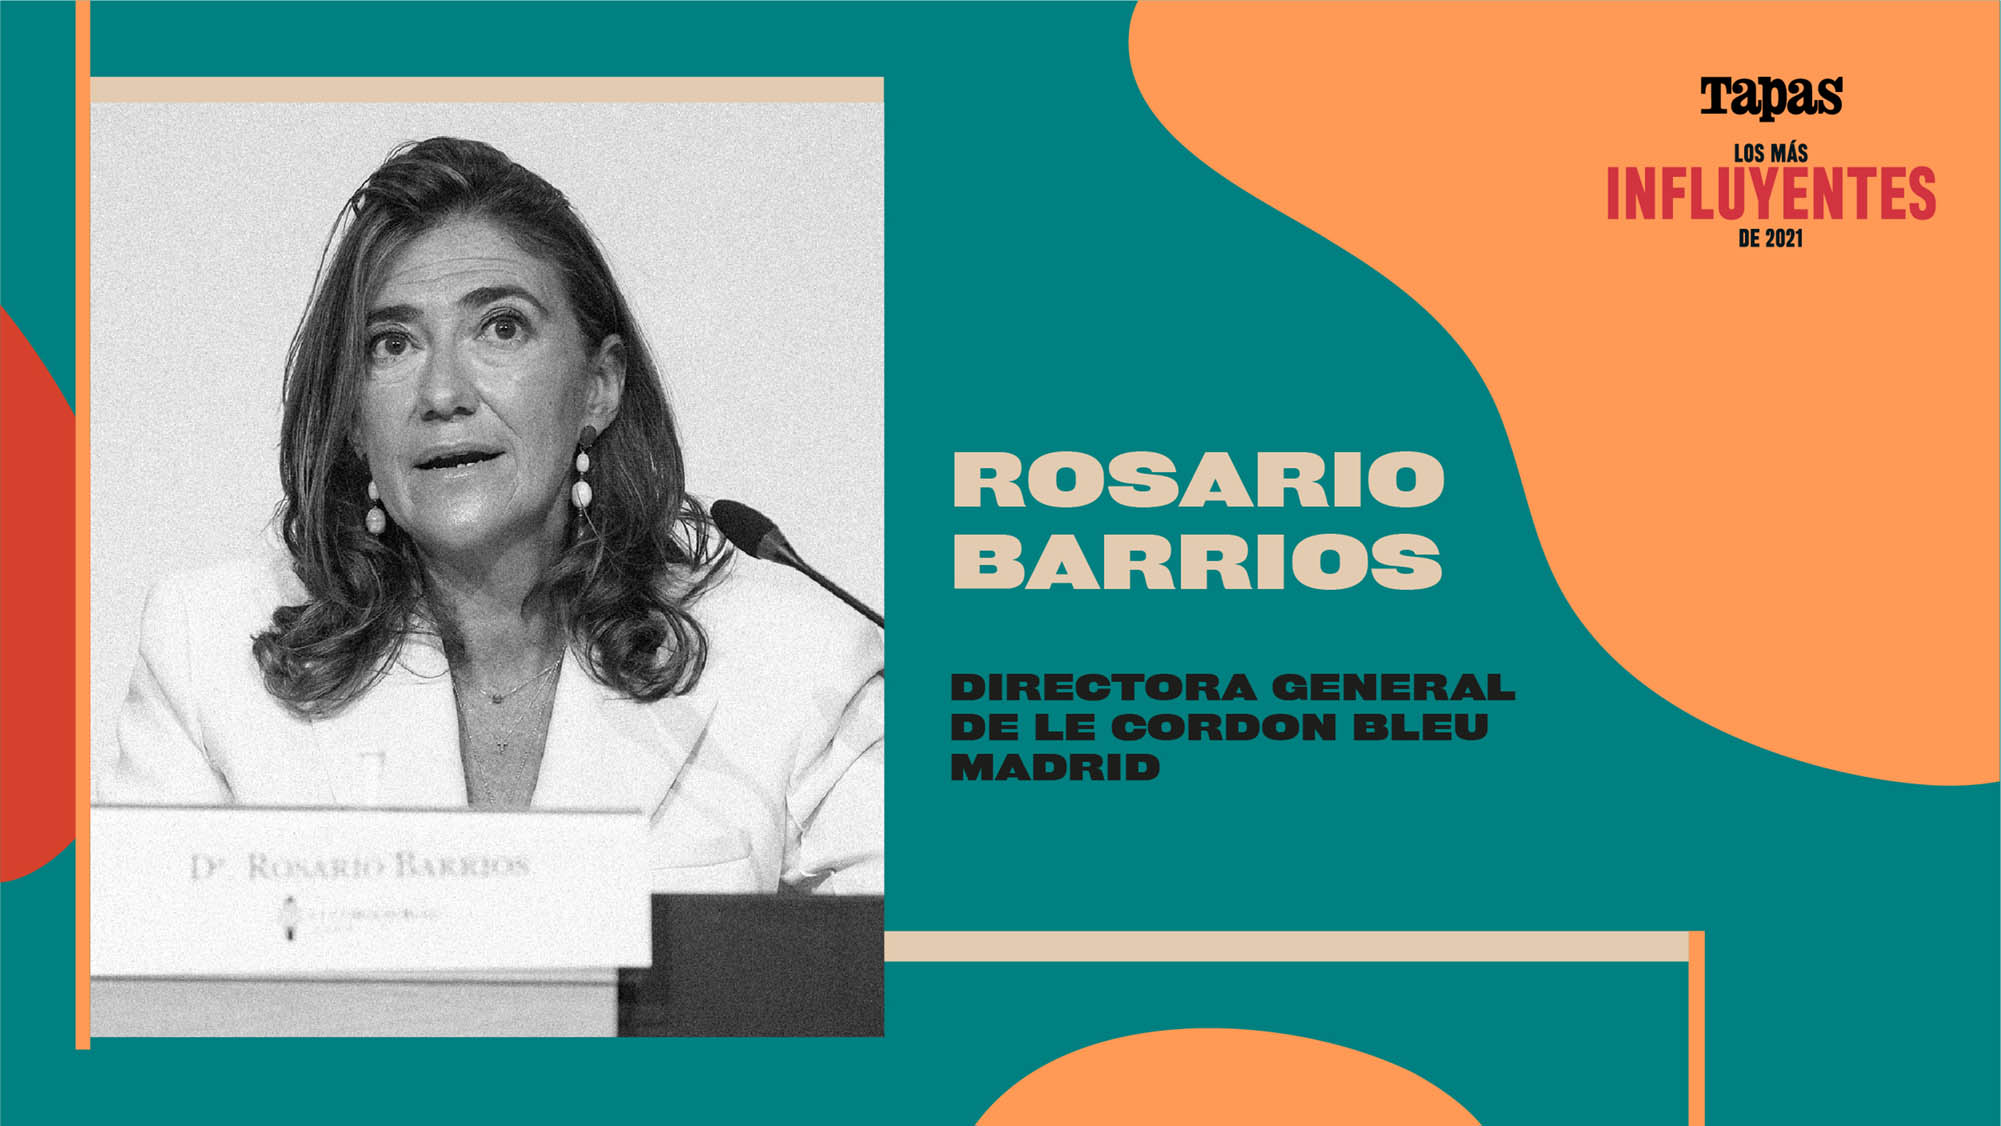 General Manager of Le Cordon Bleu Madrid, Ms. Rosario Barrios, has been included in the list of “The Most Influential (people) in 2021” by the food magazine “Tapas”.